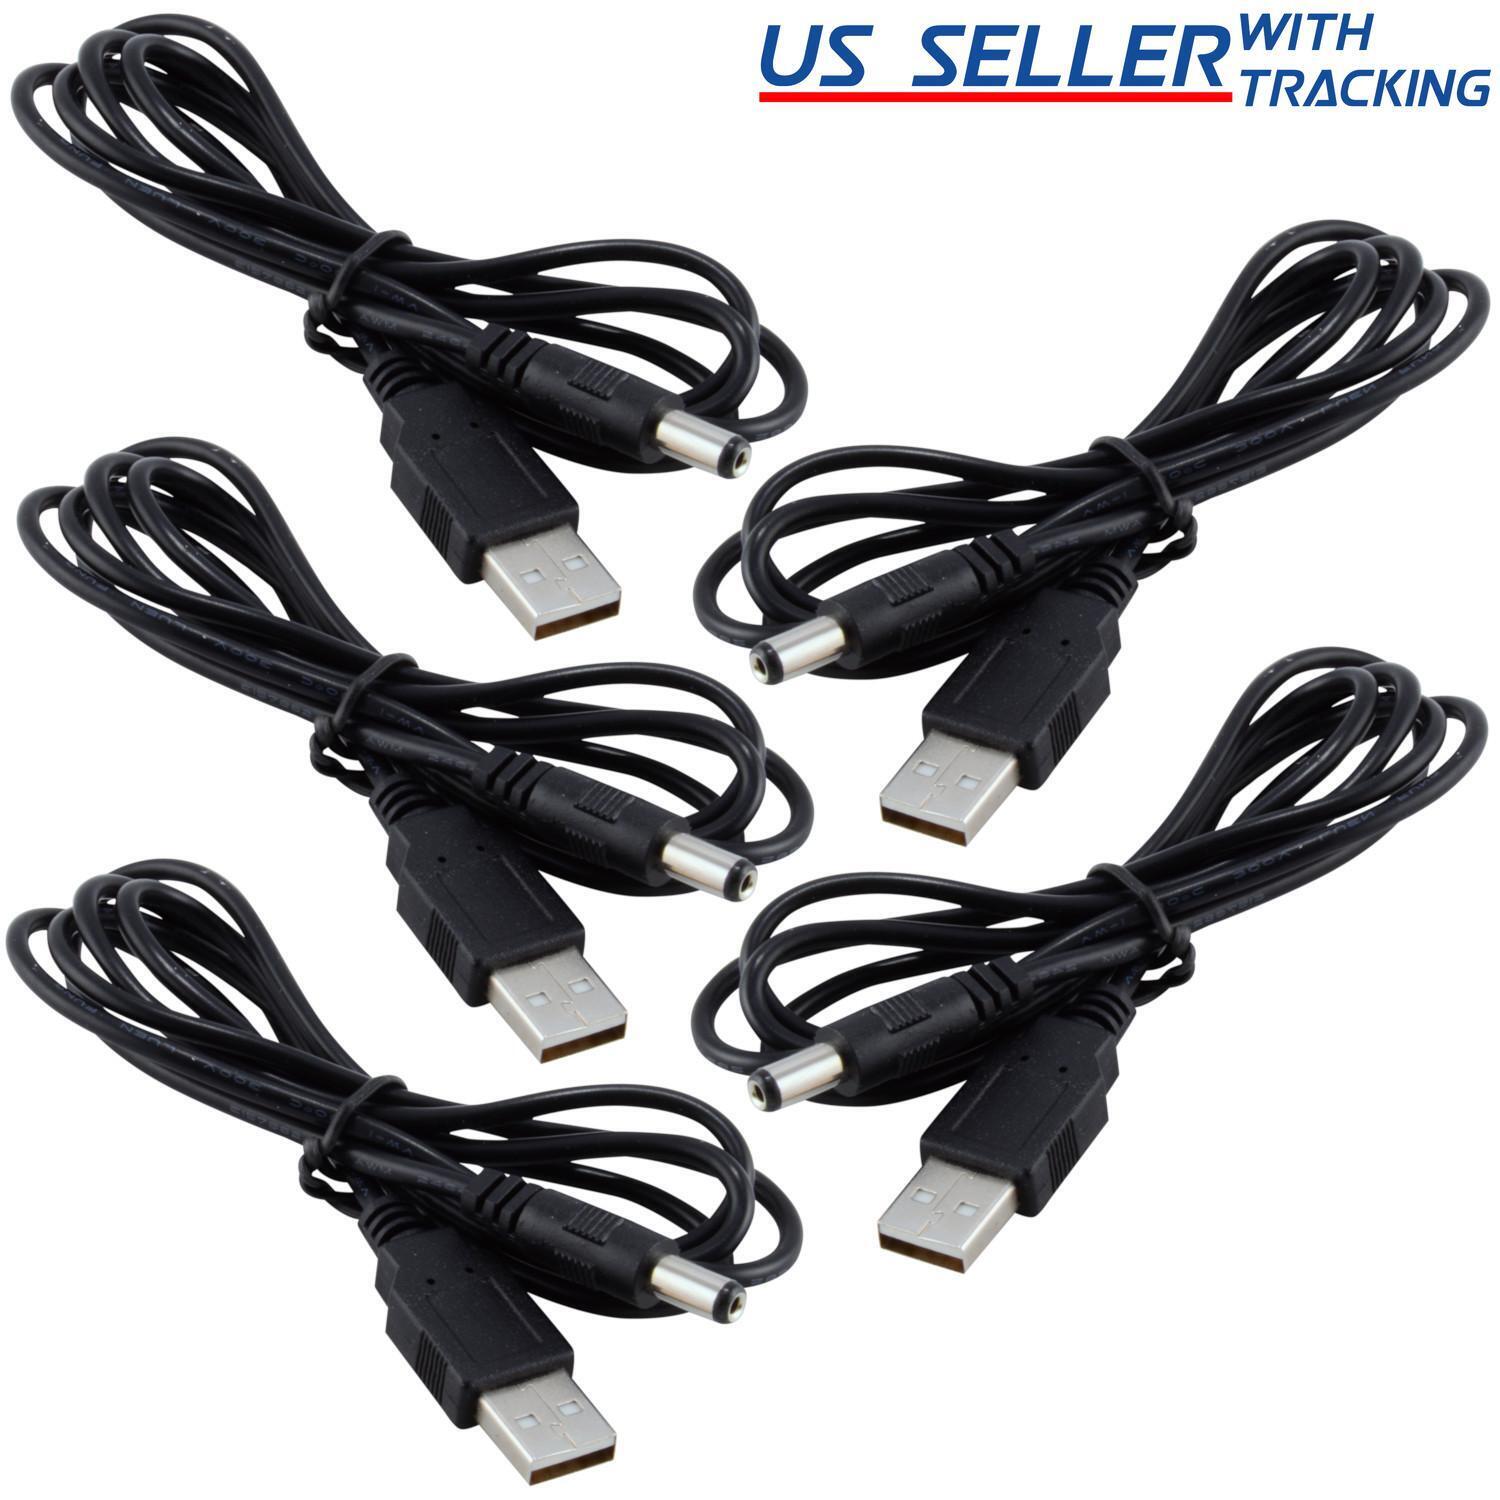 (5-pack) USB to 5.5x2.1mm Barrel Connector 5V DC Power Cable Male, 120cm/4ft 5X